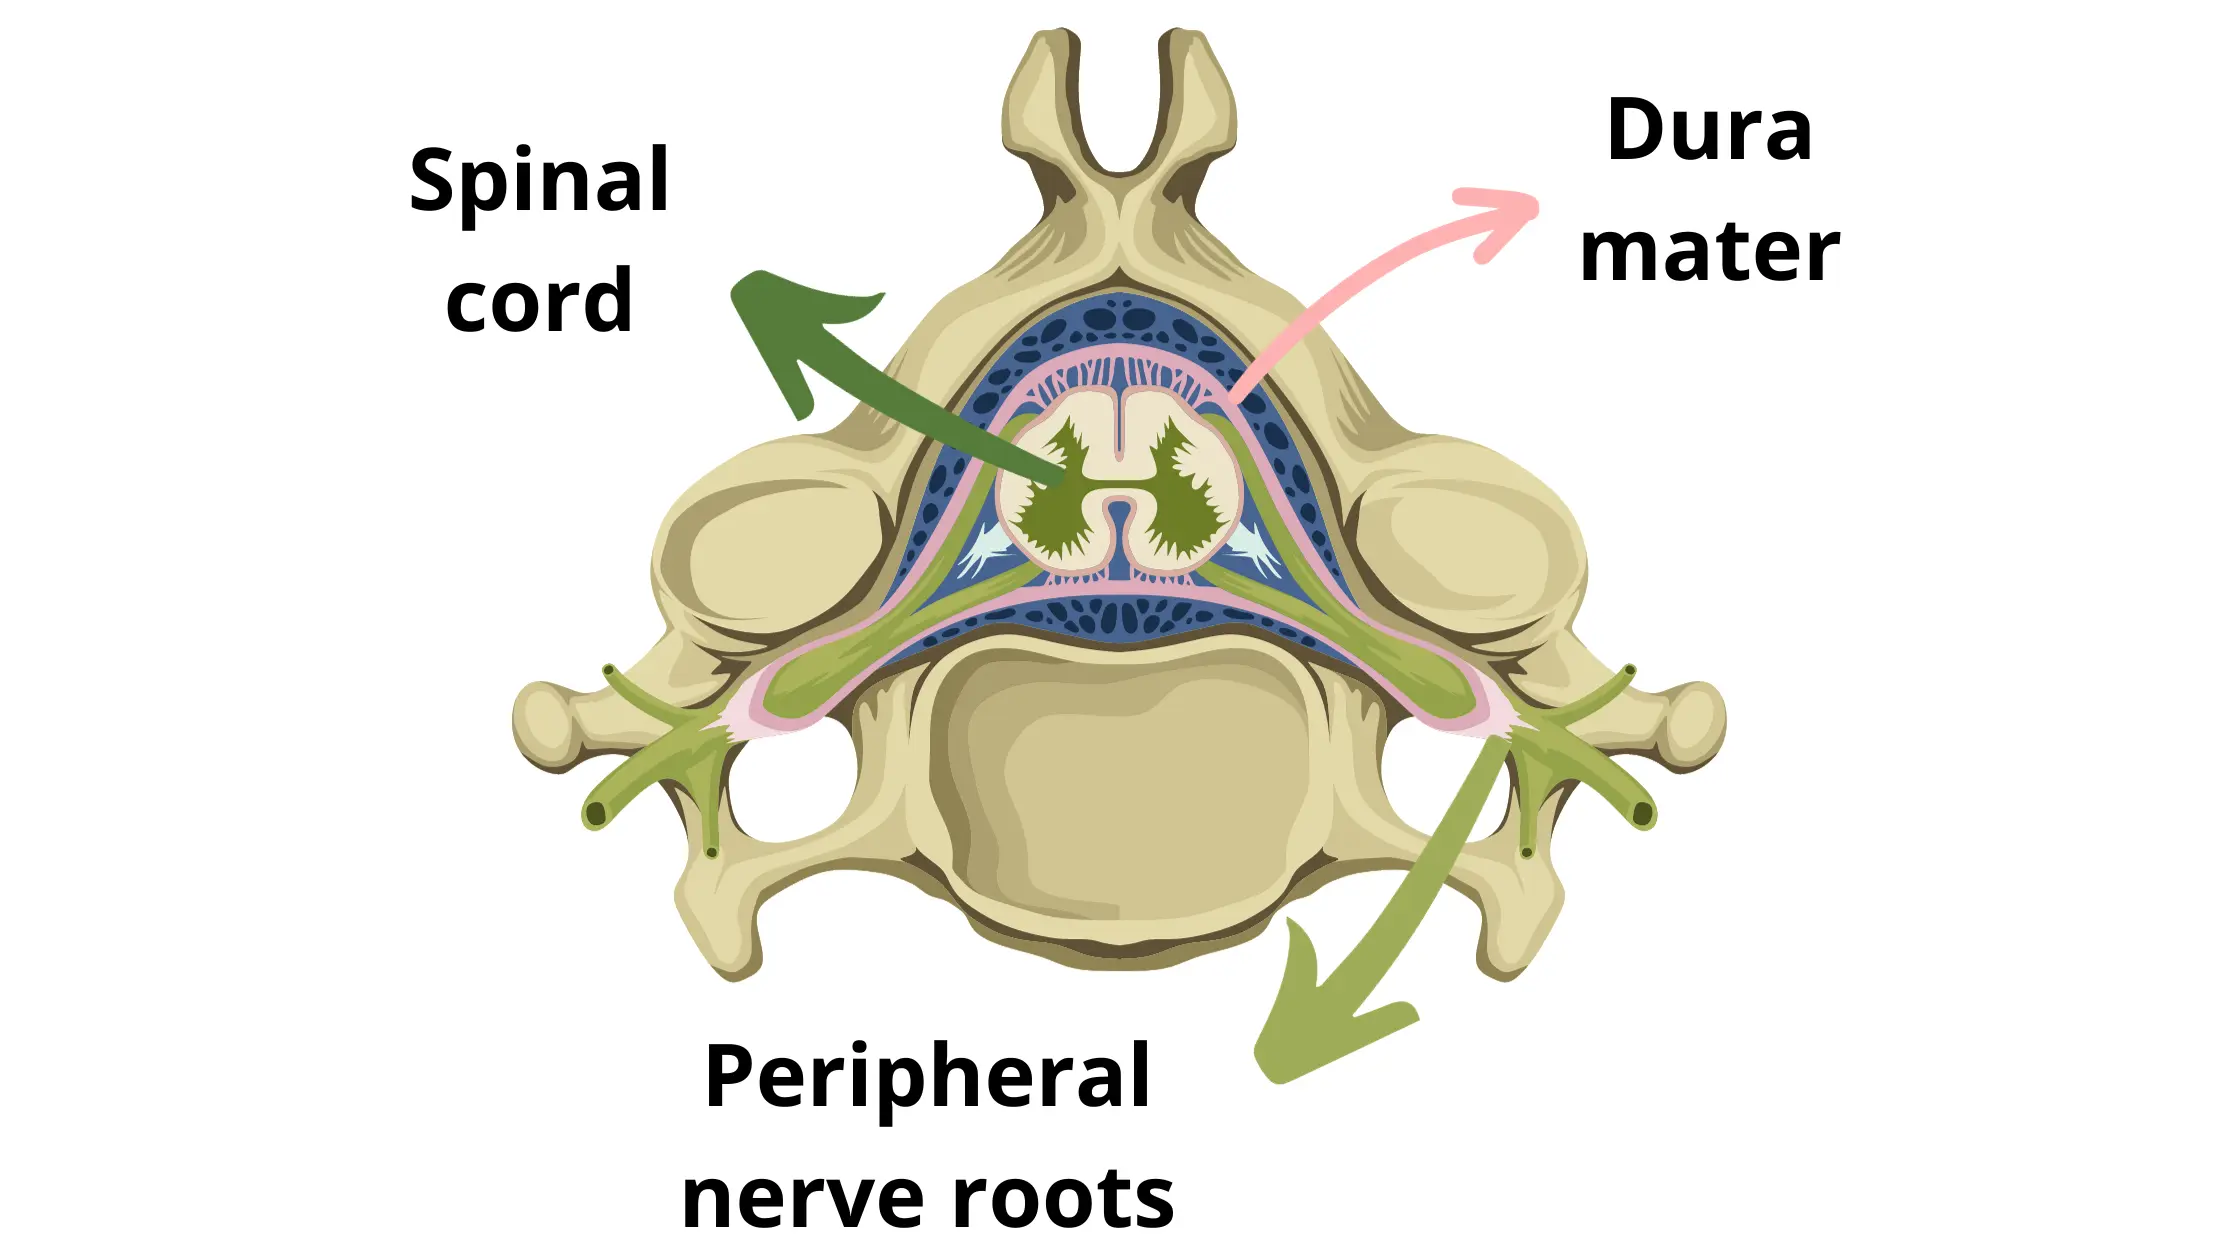 representation of a cervical vertebra, with spinal cord, dura mater and peripheral nerve roots